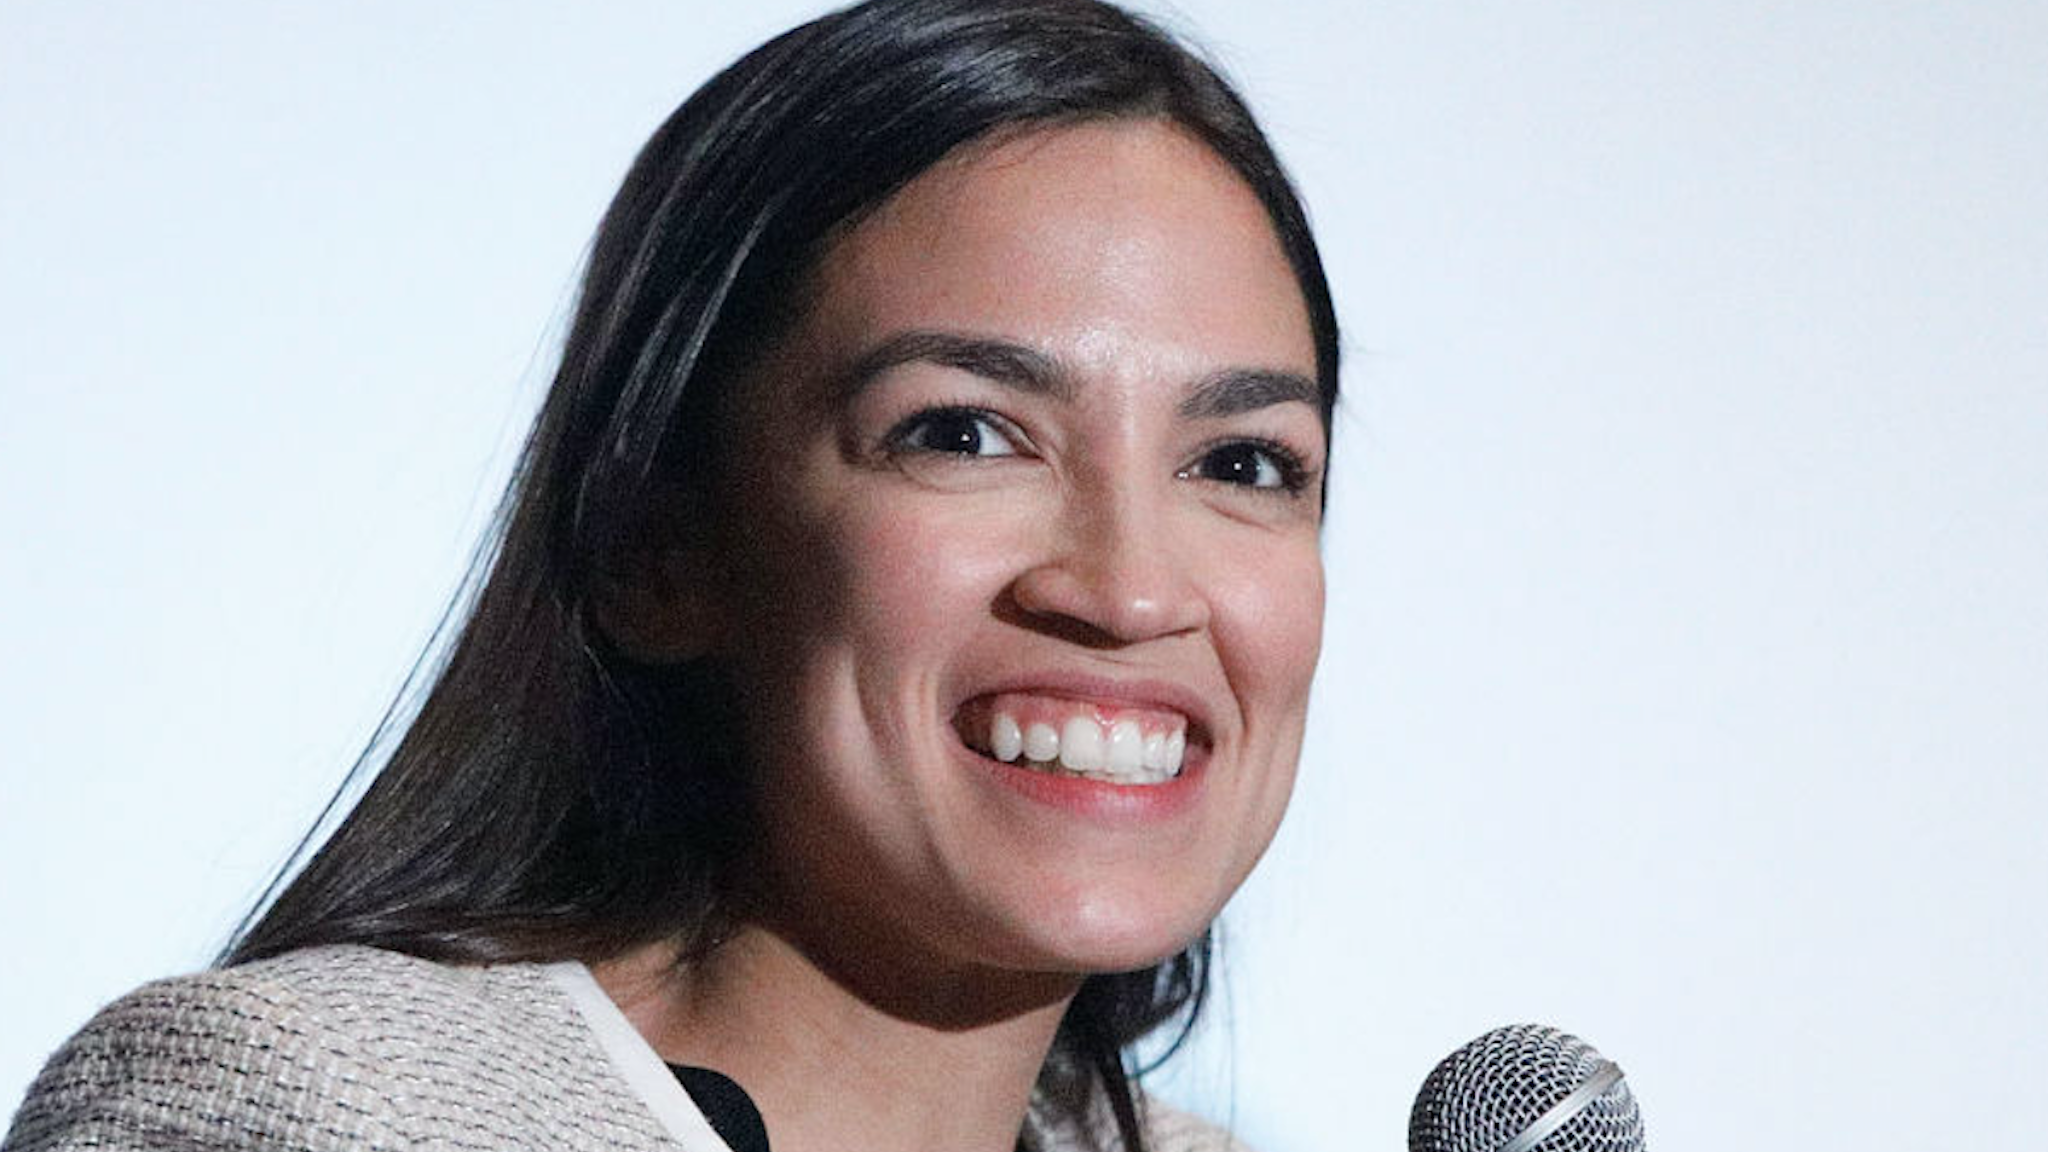 US Representative Alexandria Ocasio-Cortez on stage during the 2019 Athena Film Festival closing night film, "Knock Down the House" at the Diana Center at Barnard College on March 3, 2019 in New York City